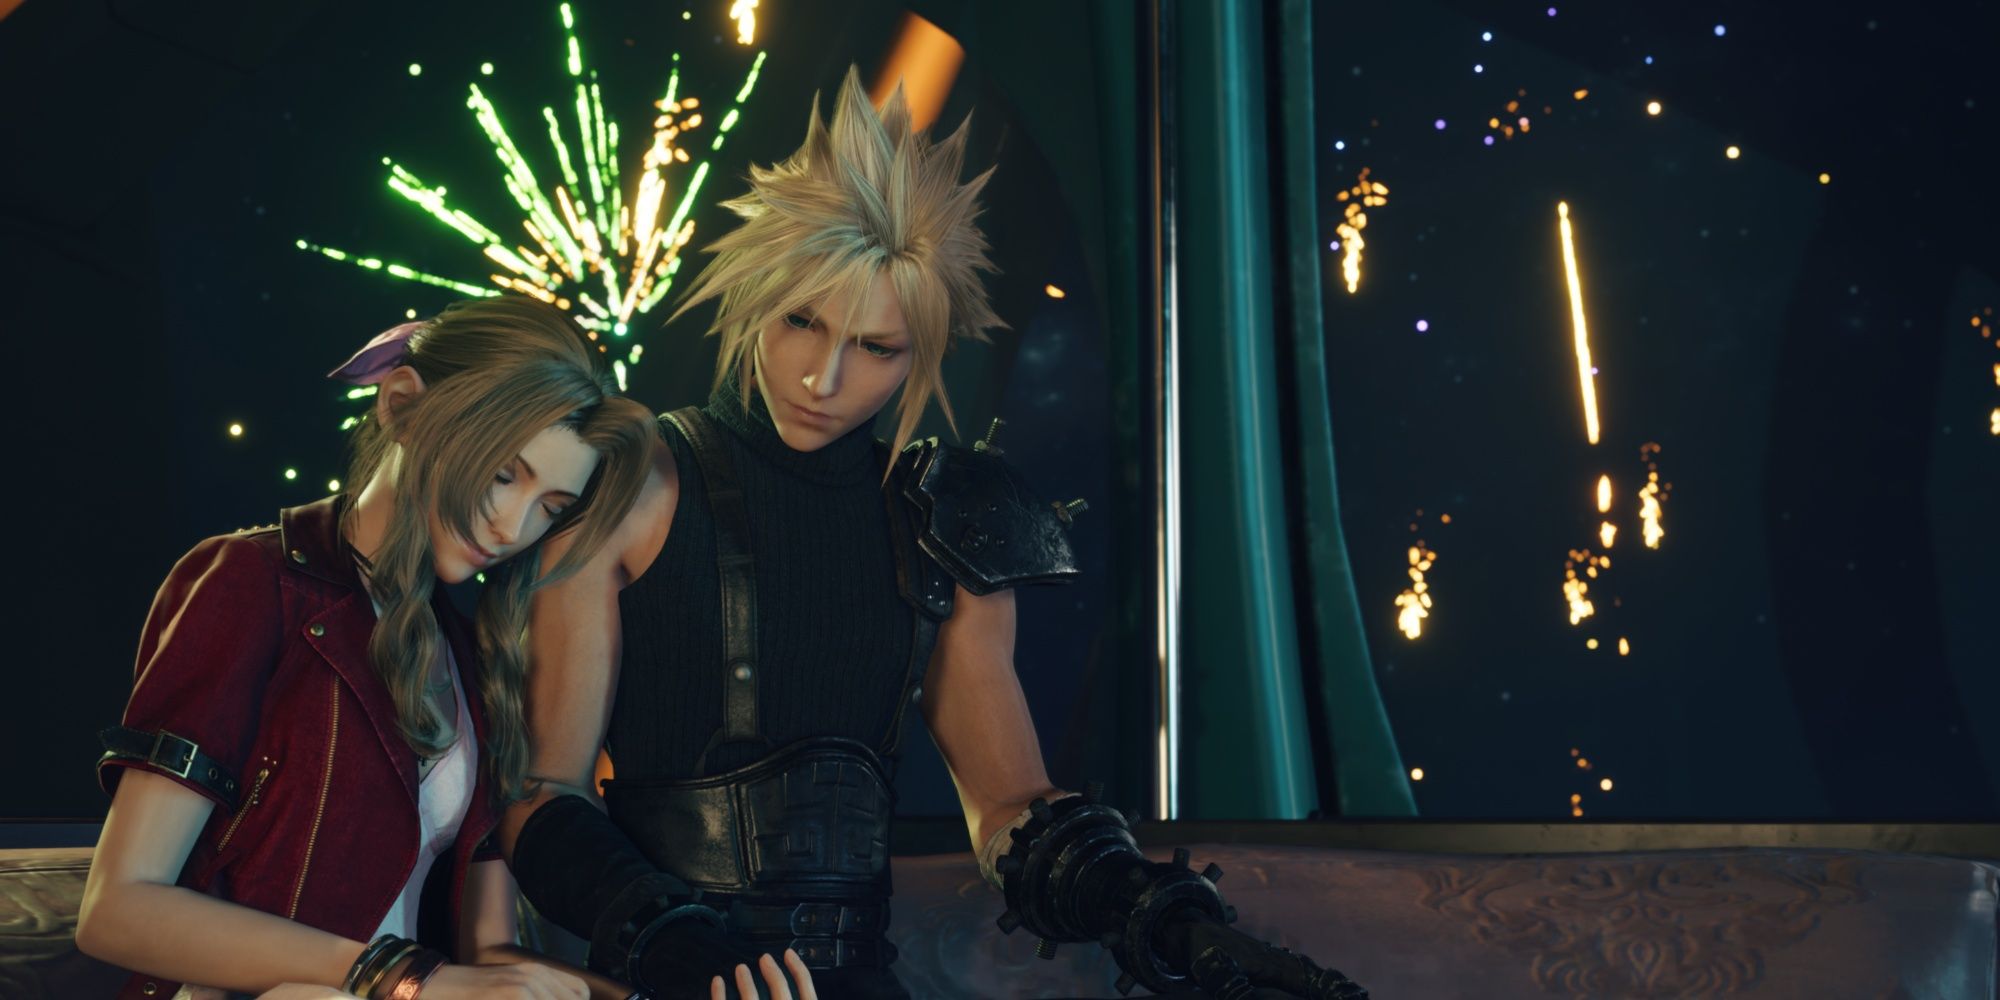 Final Fantasy 7 Rebirth - Golden Saucer Date With Aerith